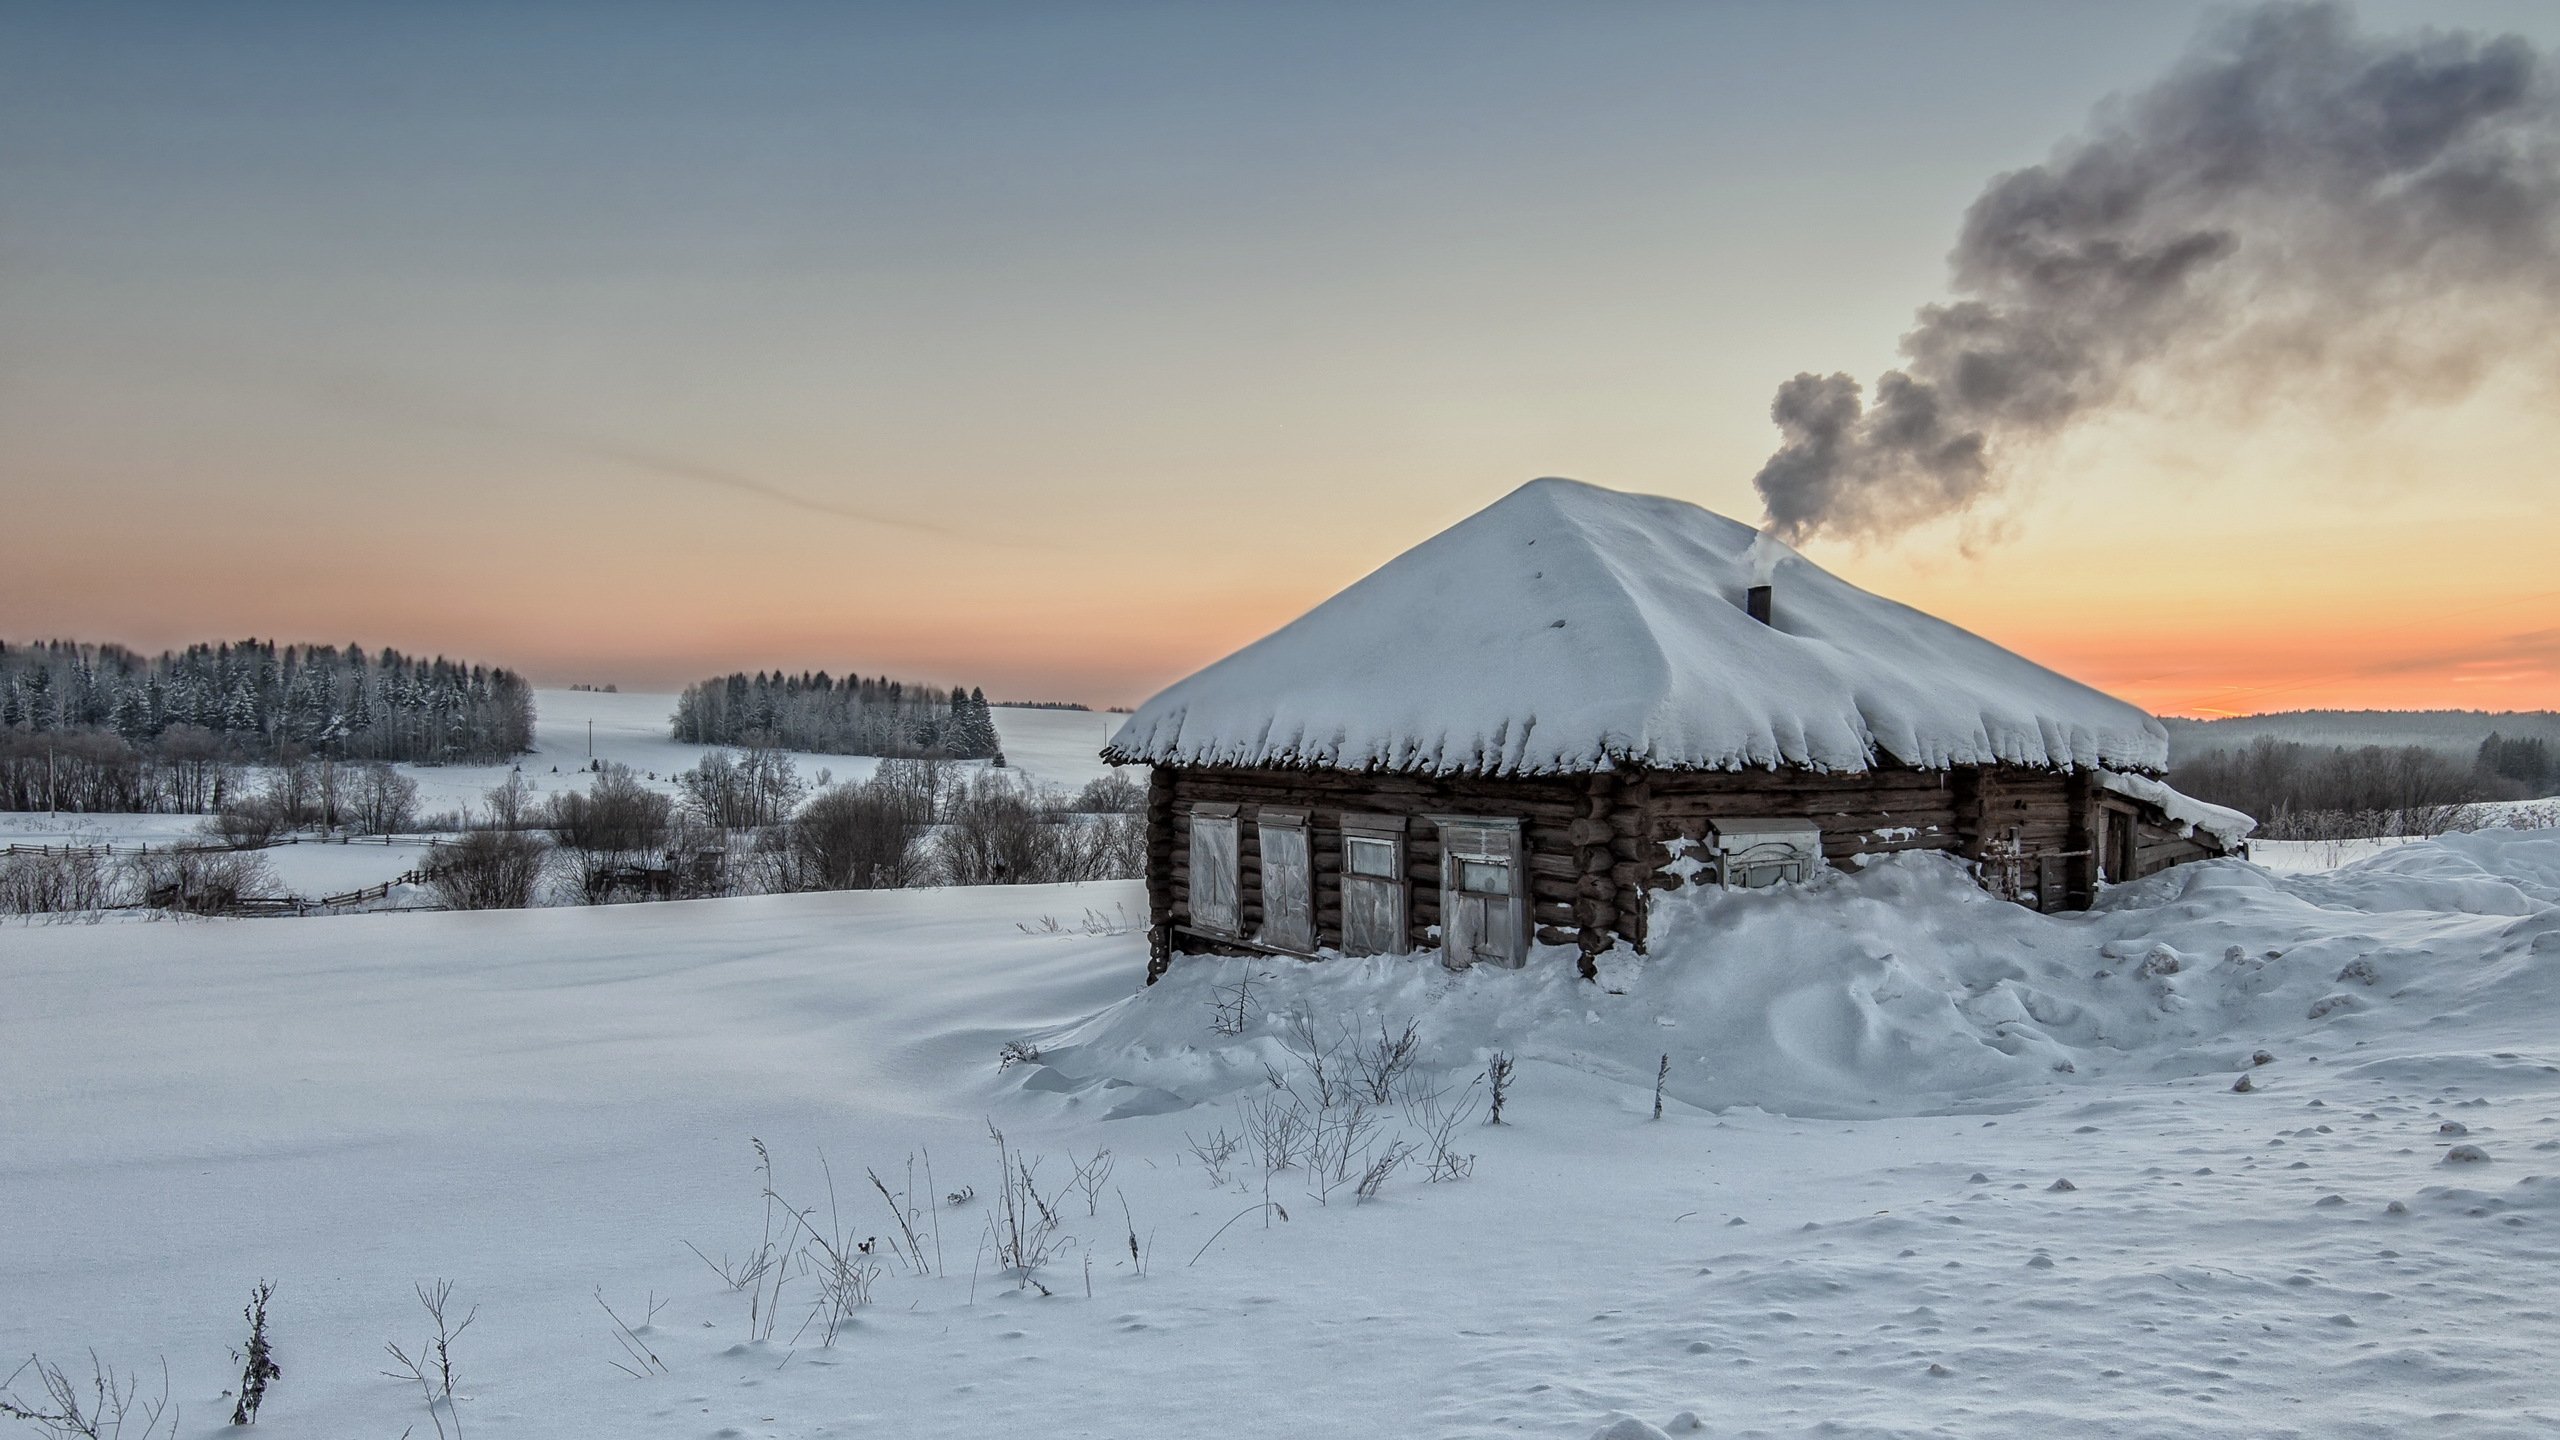 chimney, Landscape, Mountain, Nature, Snow, Snow, Filed, Sunset, Winter, House, Wooden, House Wallpaper